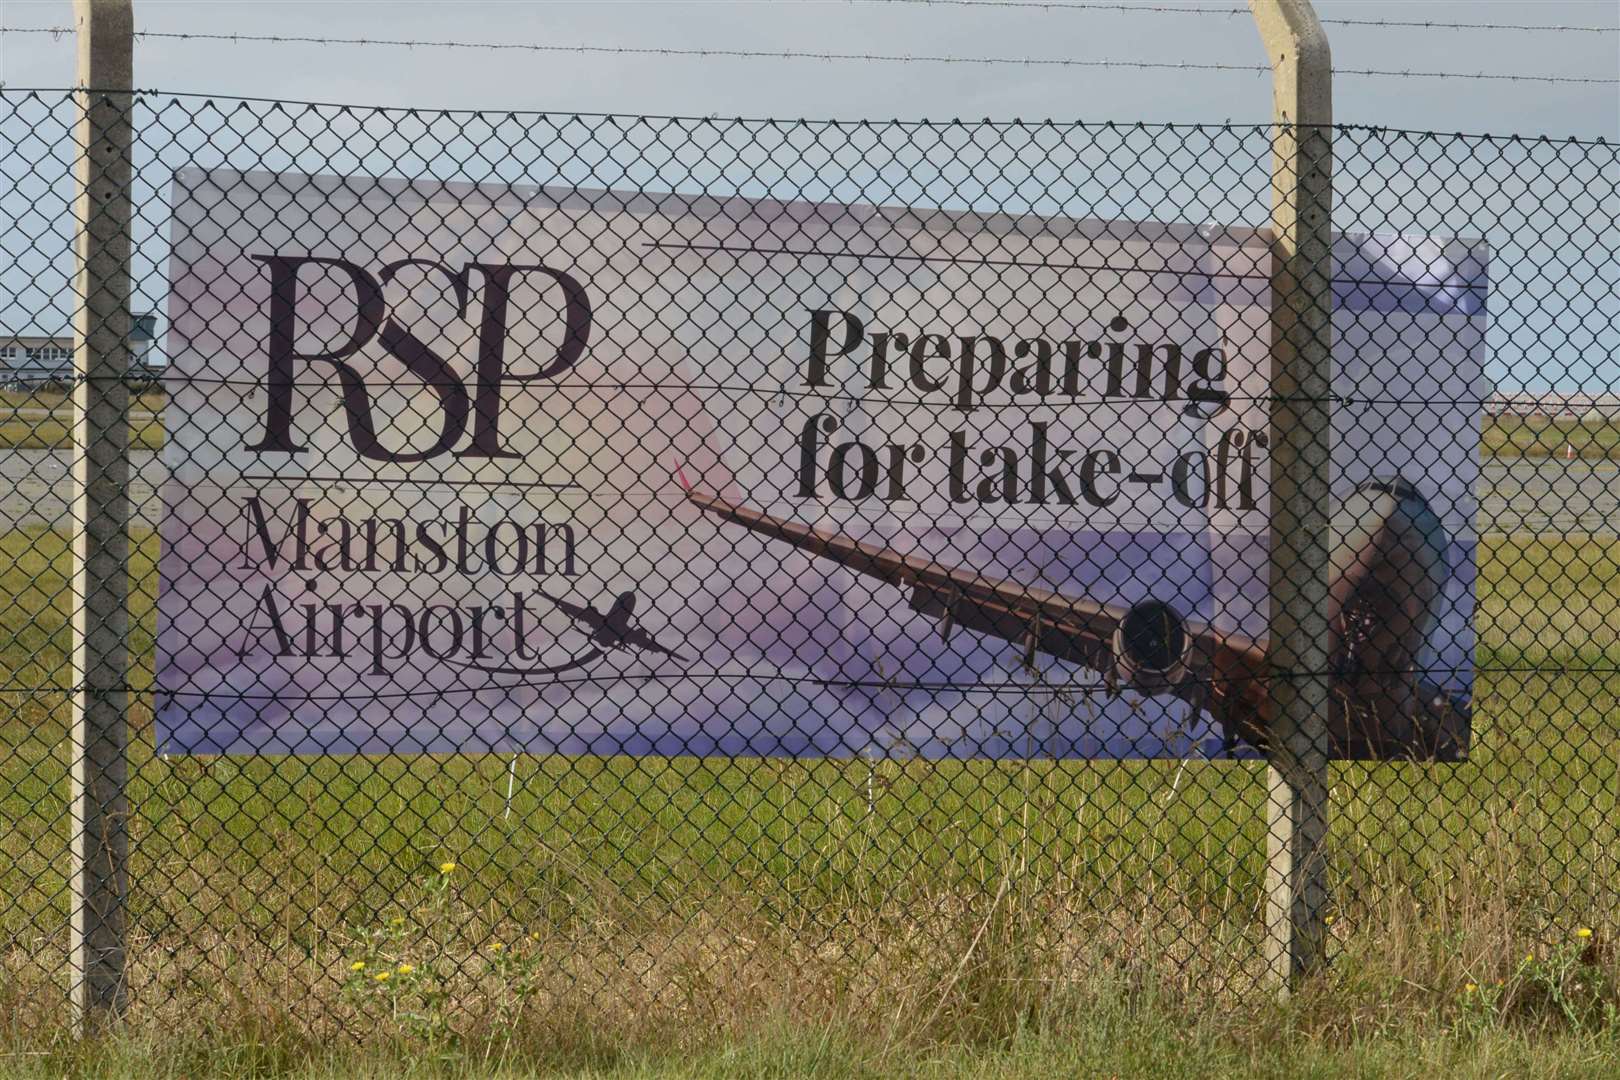 The former Manston Airport. Picture: Chris Davey